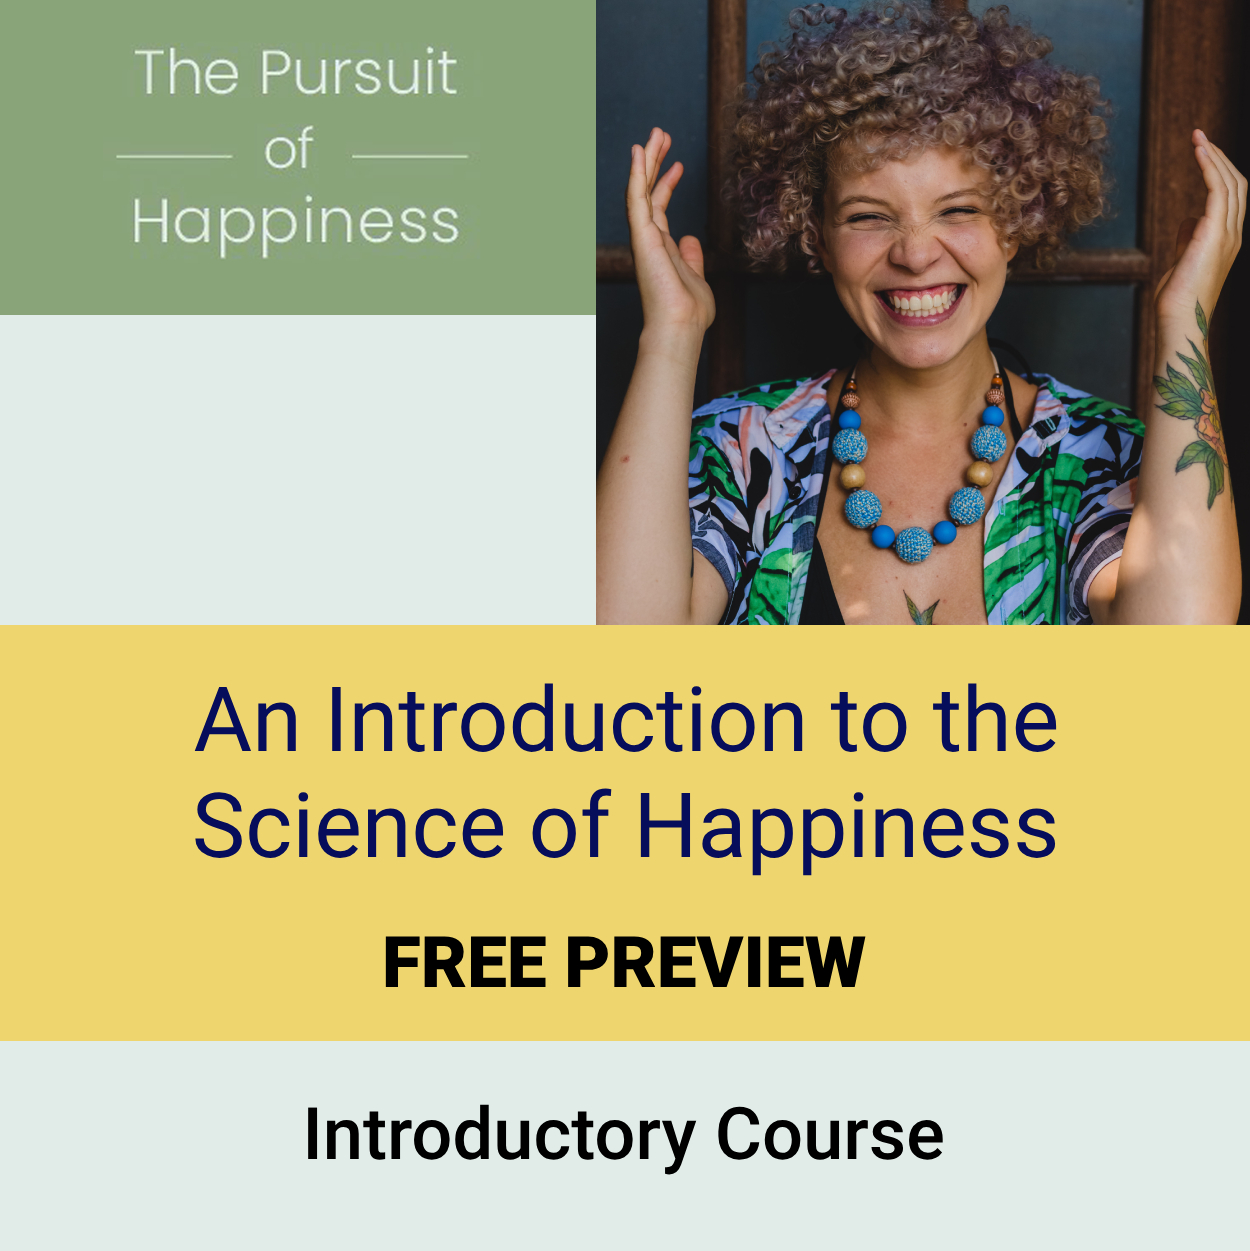 Introduction to the Science of Happiness Course